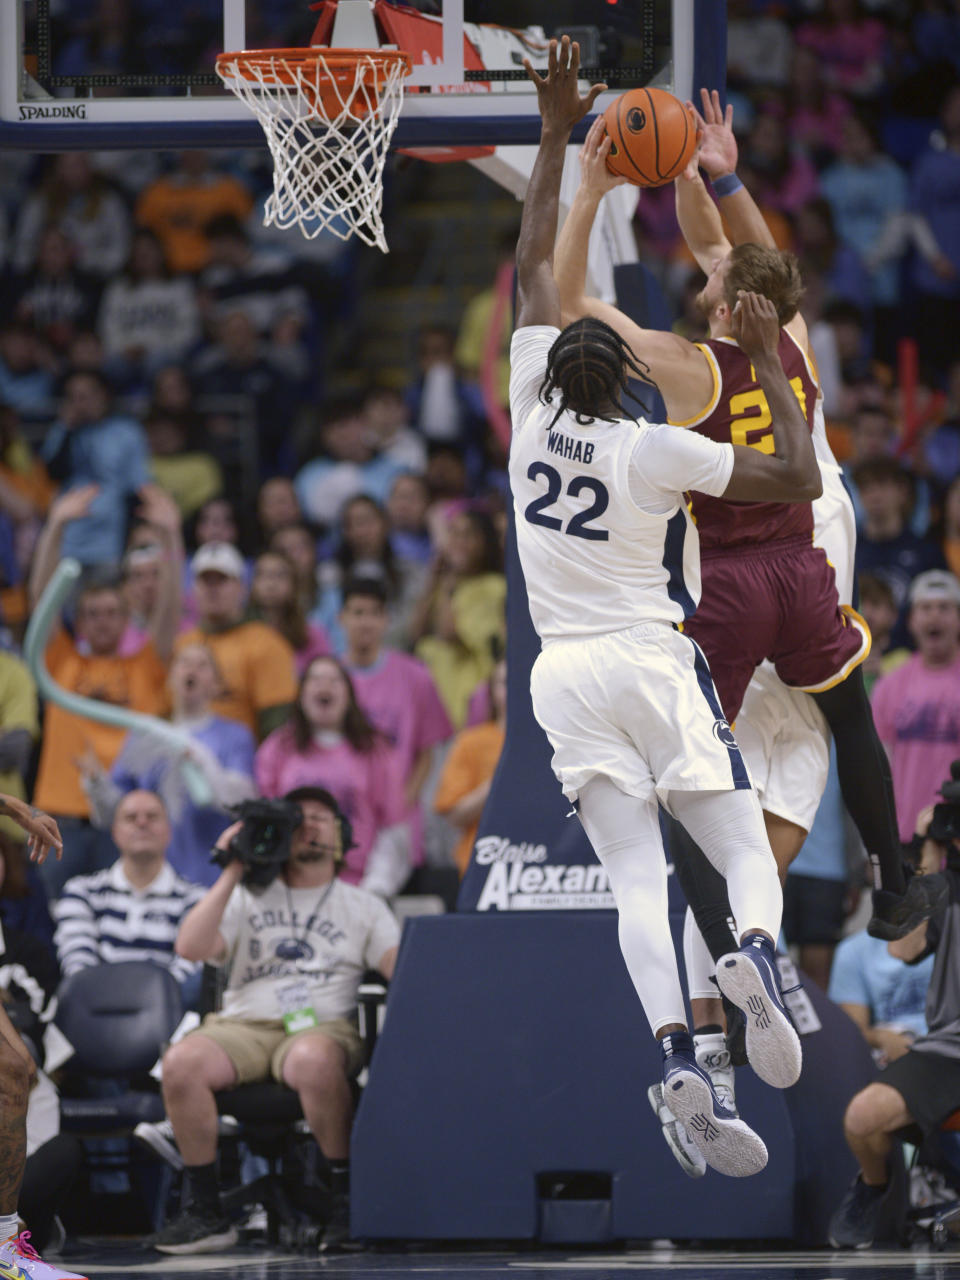 Minnesota's Parker Fox, right, drives to the basket on Penn State's Qudus Wahab (22) during the first half of an NCAA college basketball game Saturday, Jan. 27, 2024, in State College, Pa. (AP Photo/Gary M. Baranec)